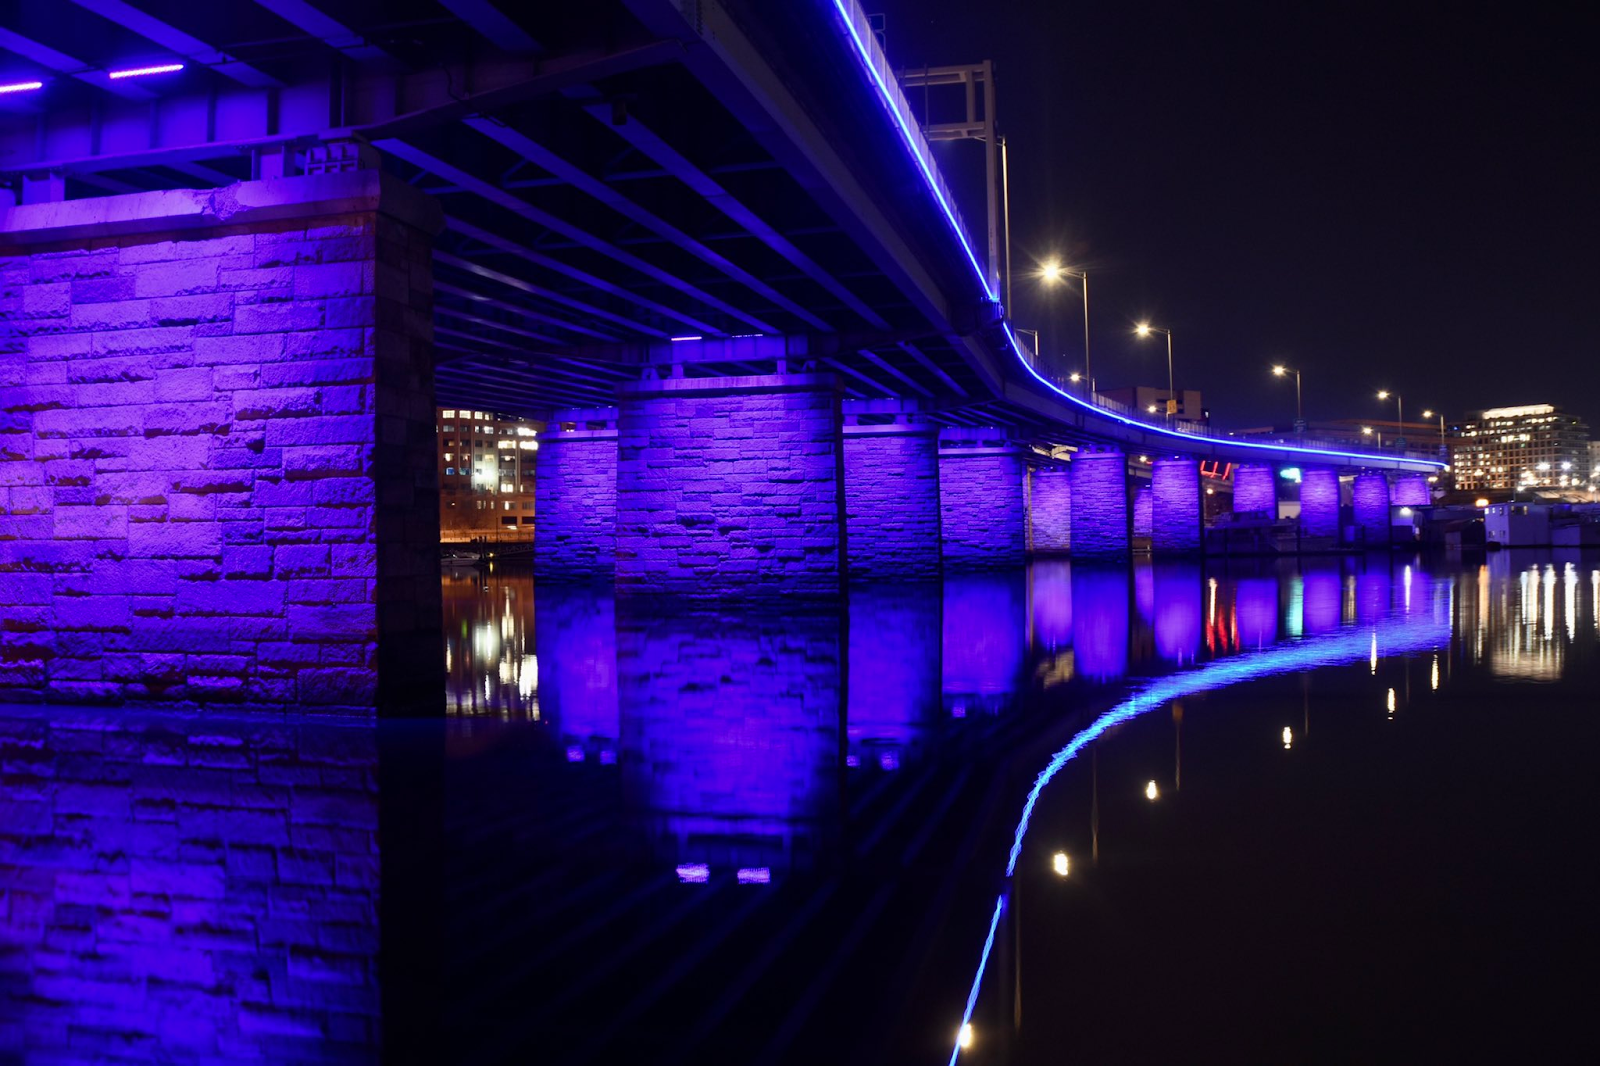 Light Placement - LEDs on the Underside of Bridge